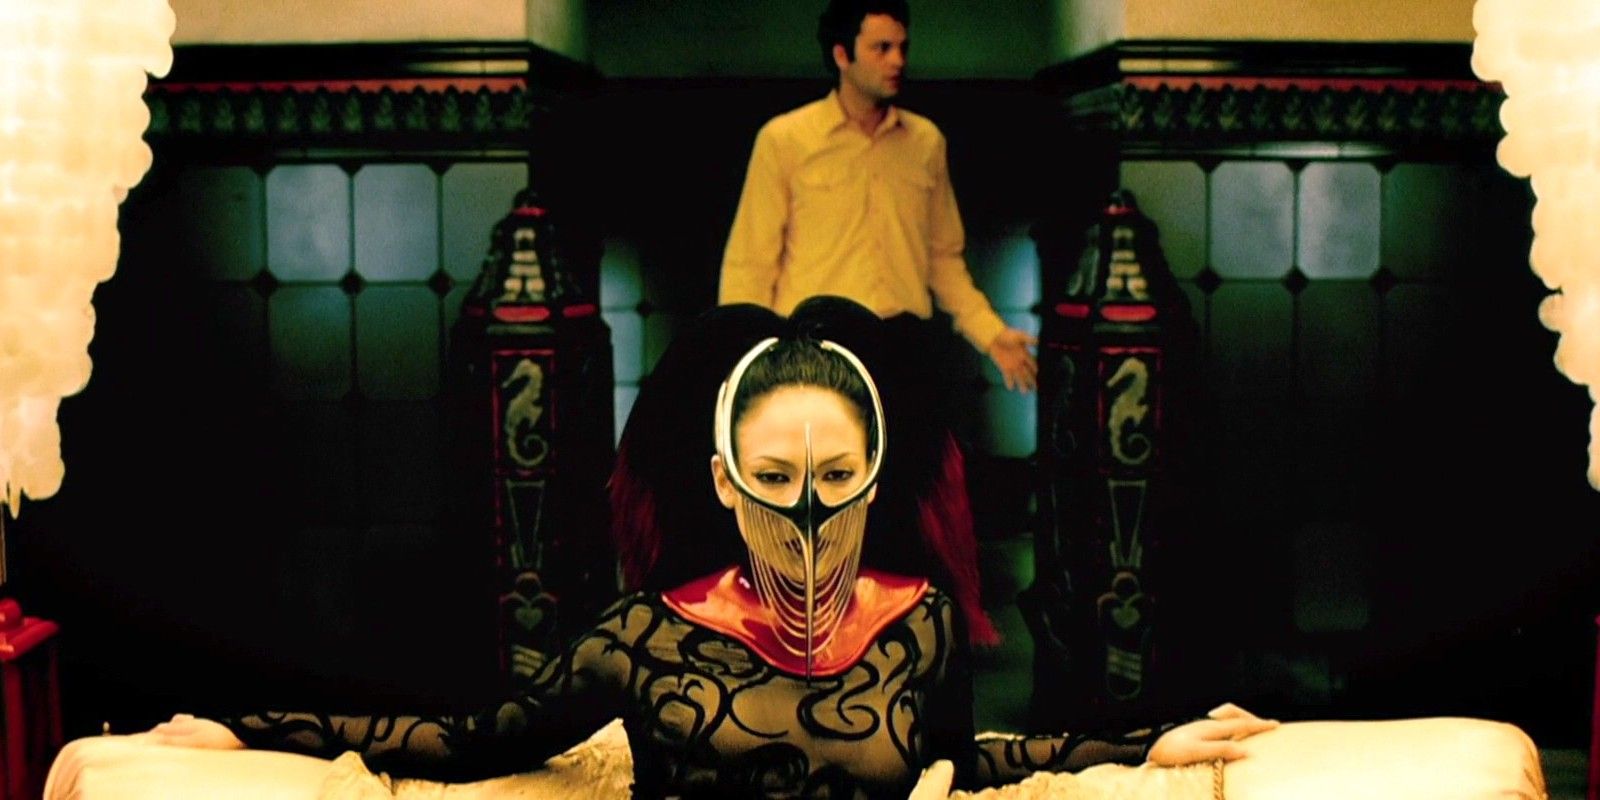 Vince Vaughn standing behind Jennifer Lopez wearing a starnge mask in The Cell